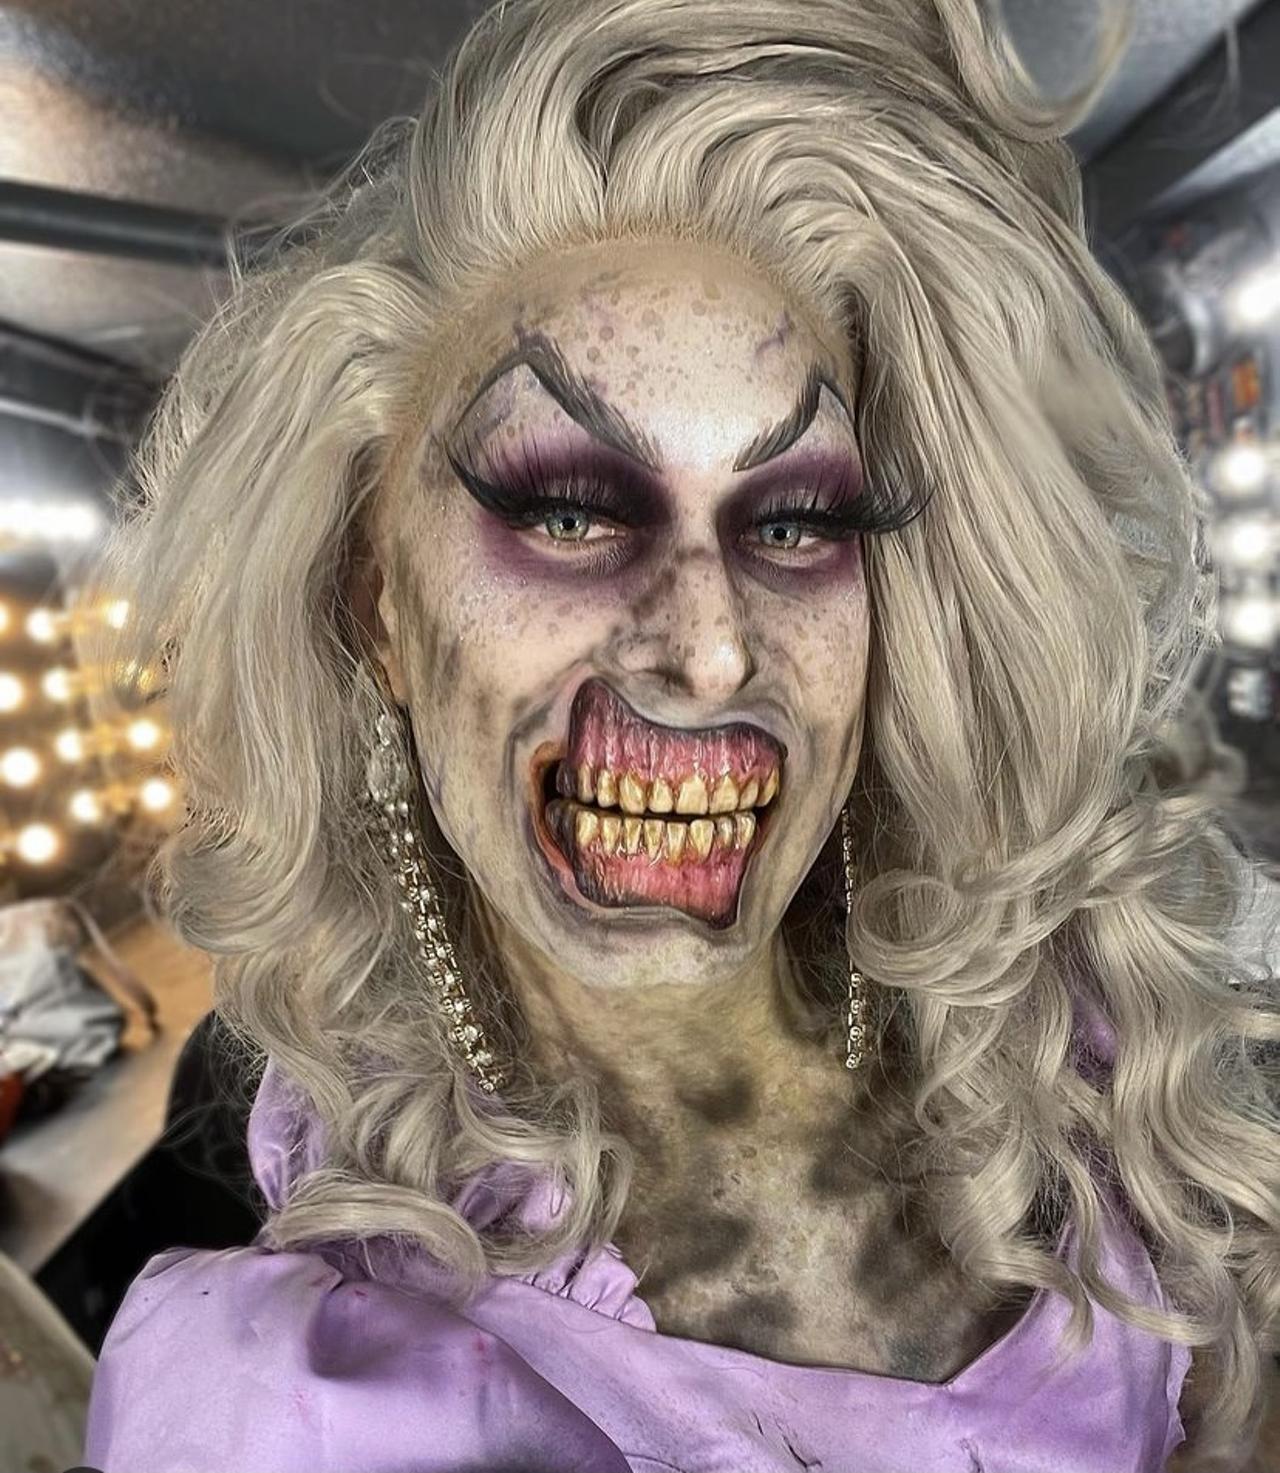 Victoria Elizabeth Black 
Black’s page is pretty spooktacular, with a look inspired by Universal’s Halloween Horror Nights and other iconic horror movie characters. This is the page to look for if you want to see some unique looks and otherworldly special effects makeup. 
